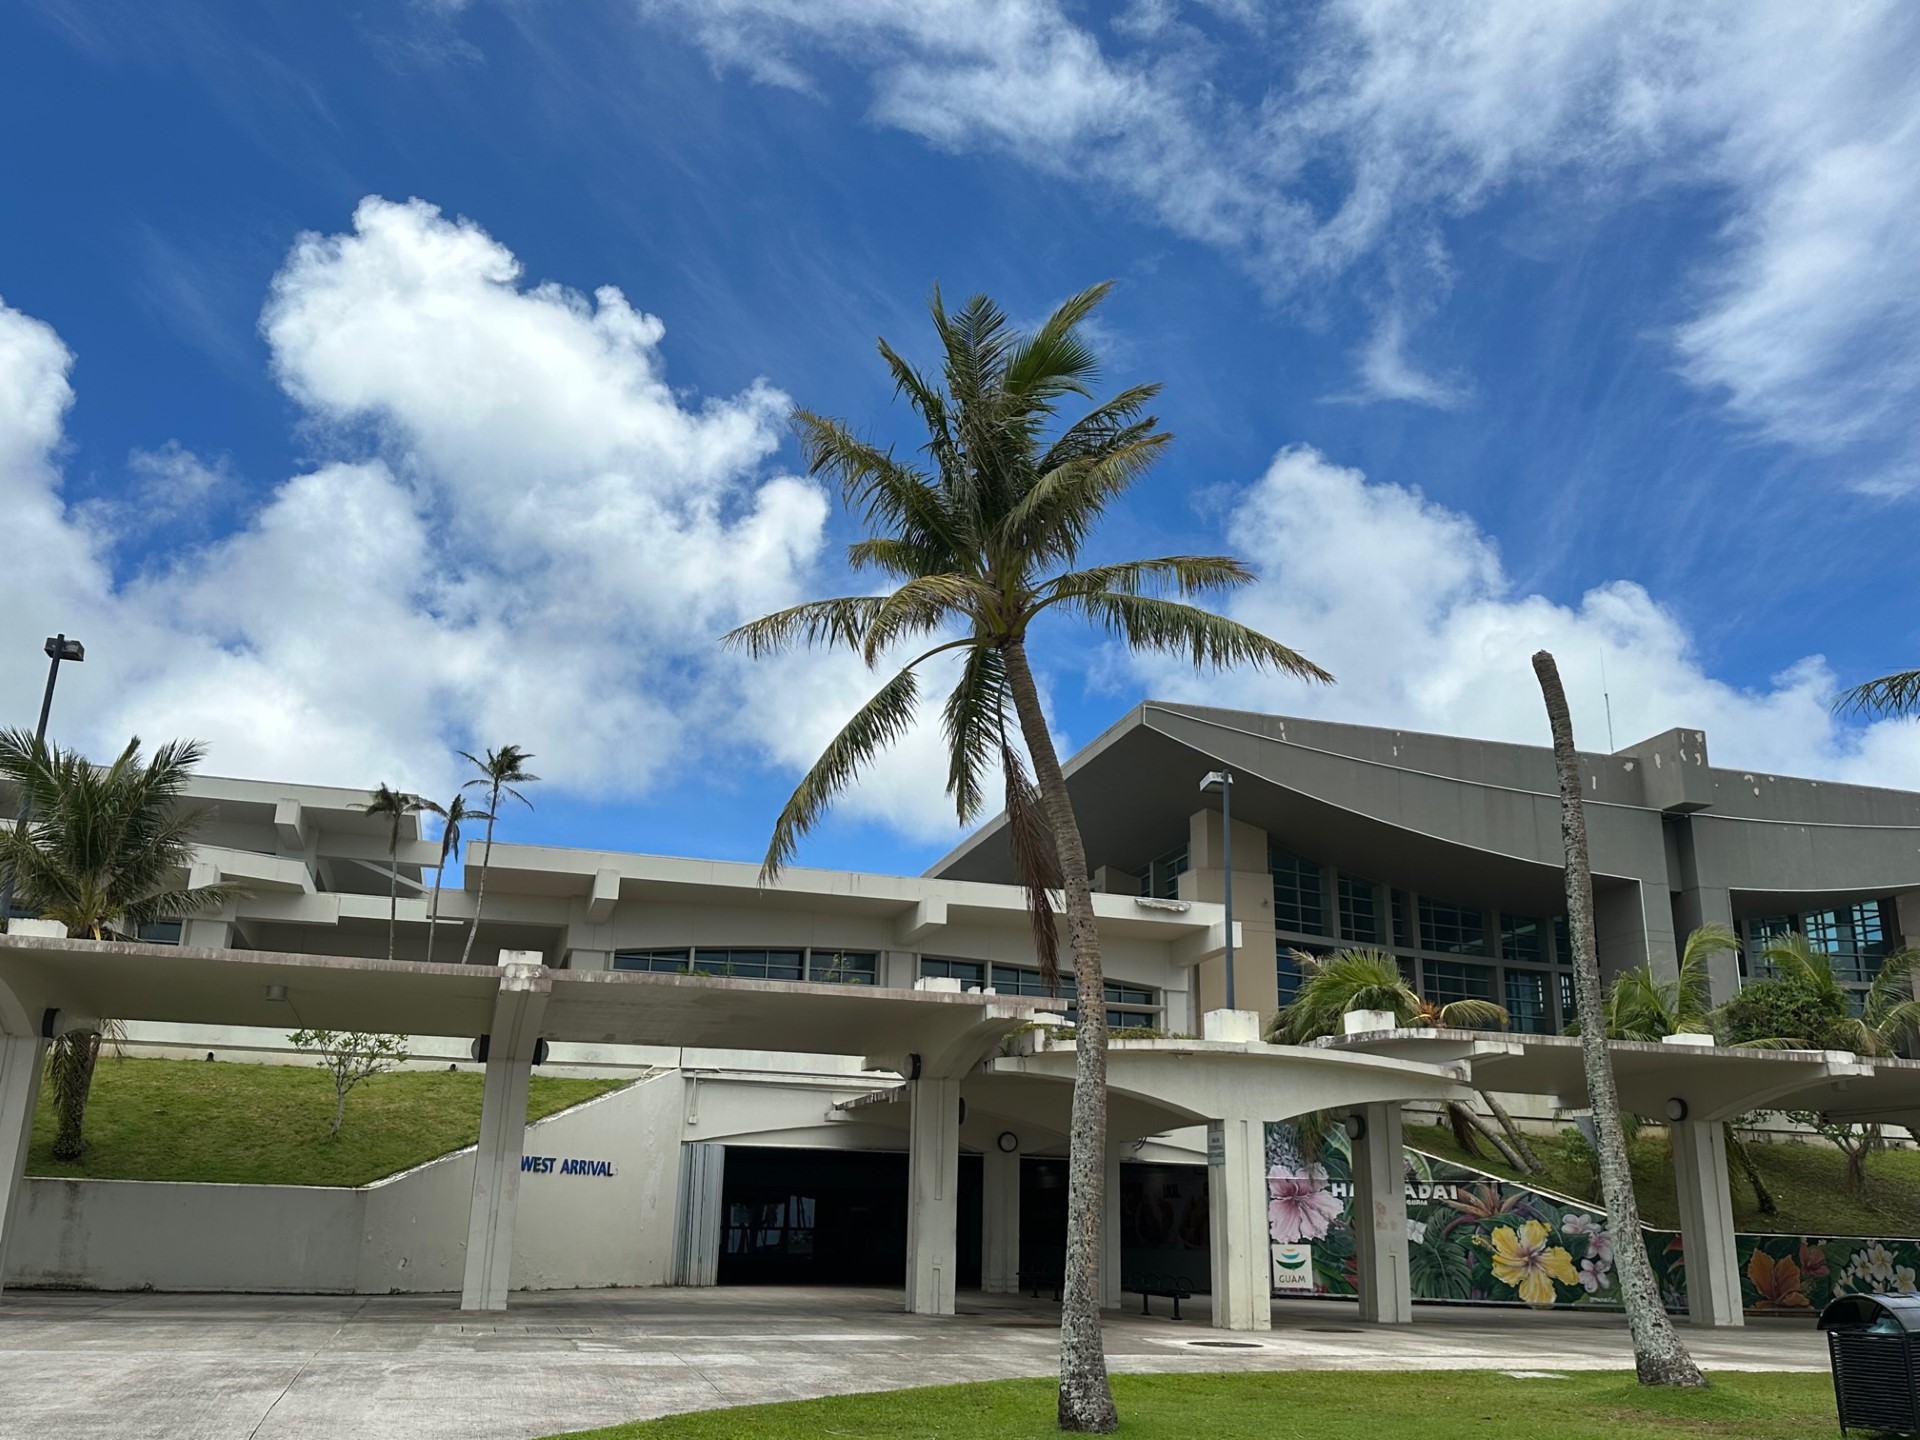 Guam Airport back in full operation 